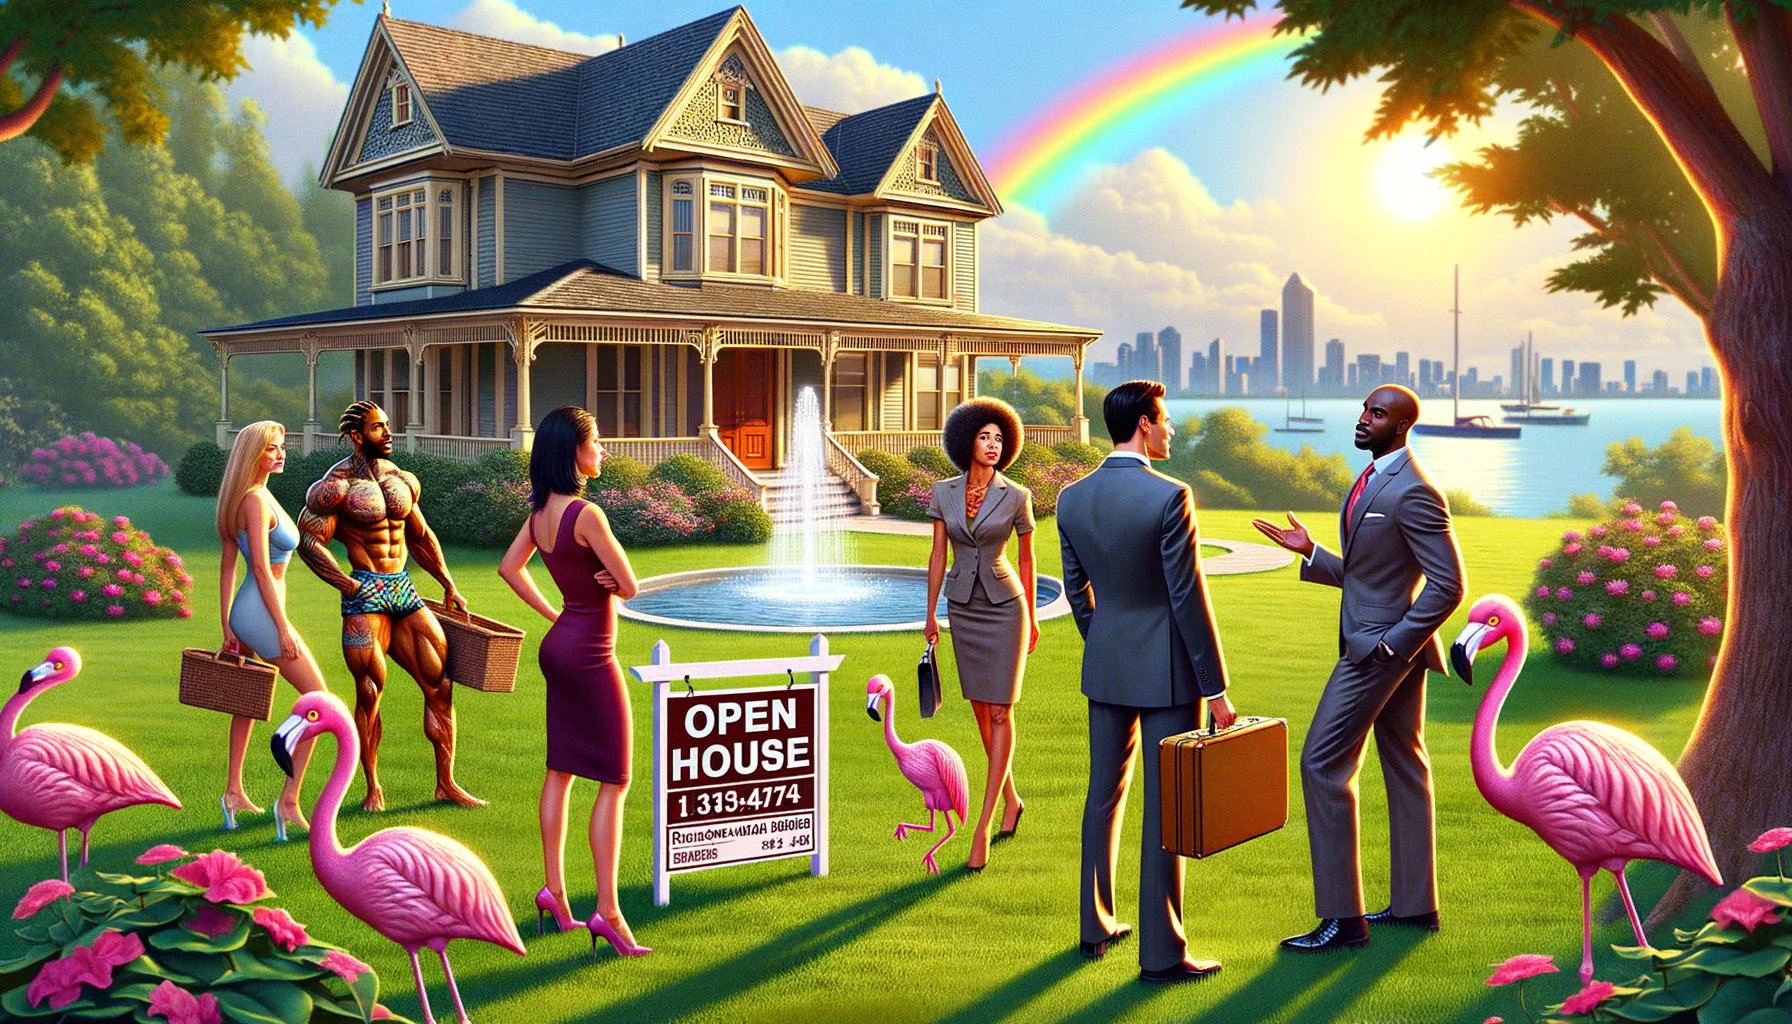 Generate a humorous image depicting a typical scene from a Real Estate Listings Digest. Think of the most idyllic scenario you could imagine such as, a sunlit yard of a Victorian house with an 'Open House' sign out front, perfectly manicured lawns, a sparkling fountain in the center, and a rainbow in the distance. A high-energy real estate agent is stylishly dressed, showing off the house to a group of diverse potential buyers: an intrigued Hispanic woman, an interested Middle-Eastern man, a curious Black woman, and a Caucasian man keenly observing the property. The unique element: a flock of flamingos in the front yard, marching in 'Open House' formation for an extra dash of humor!